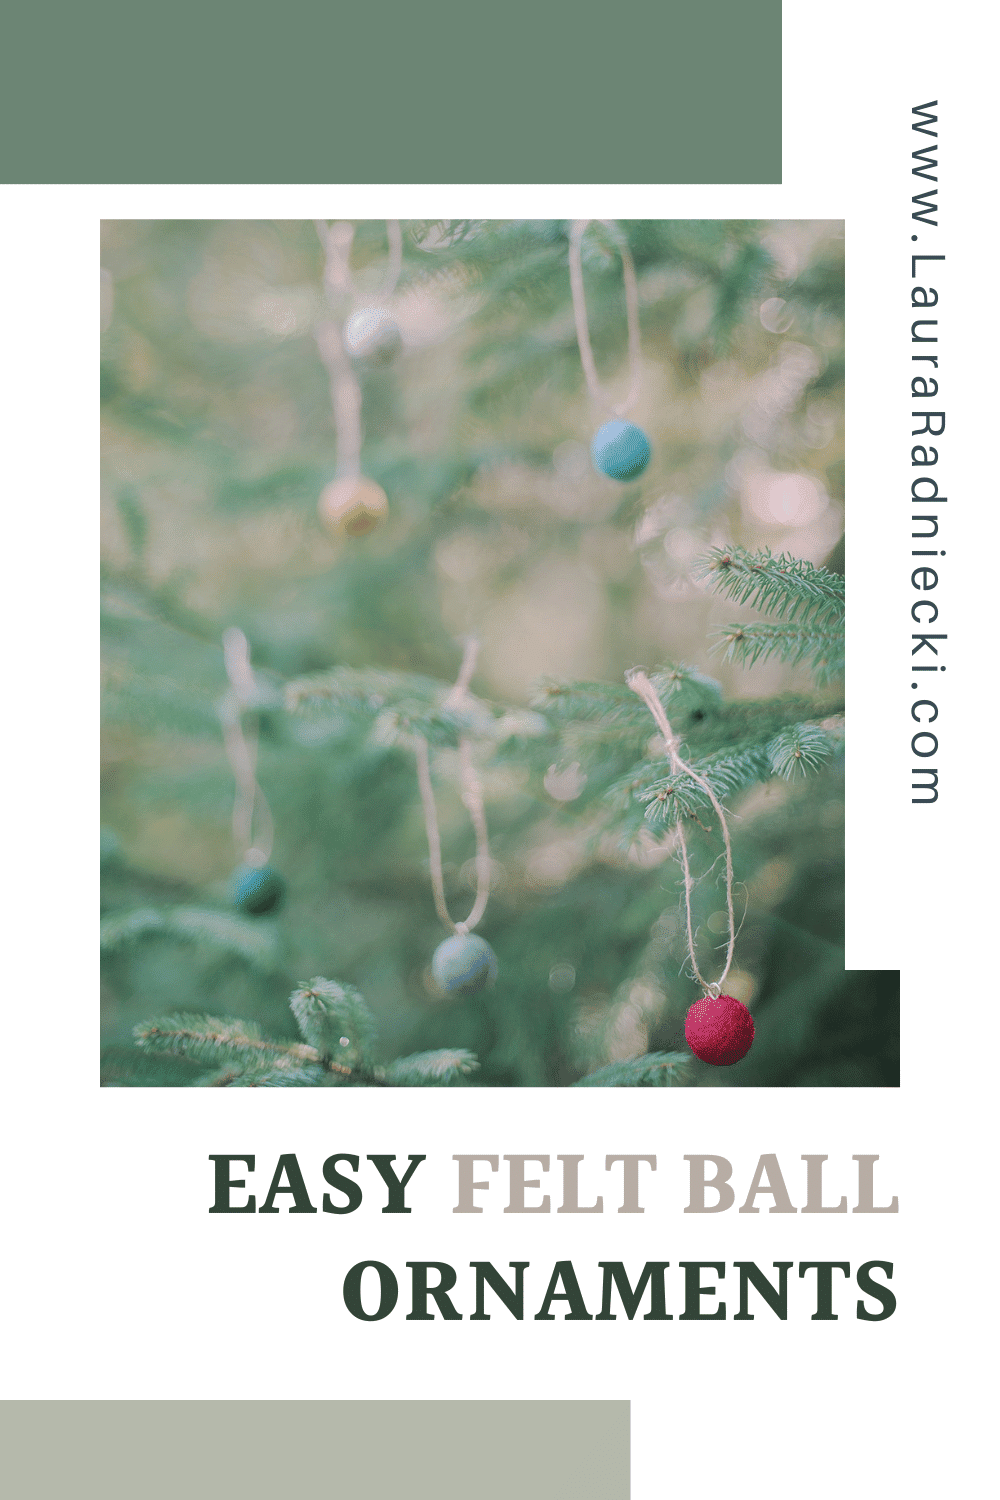 How to Make Felt Ball Ornaments for the Christmas Tree